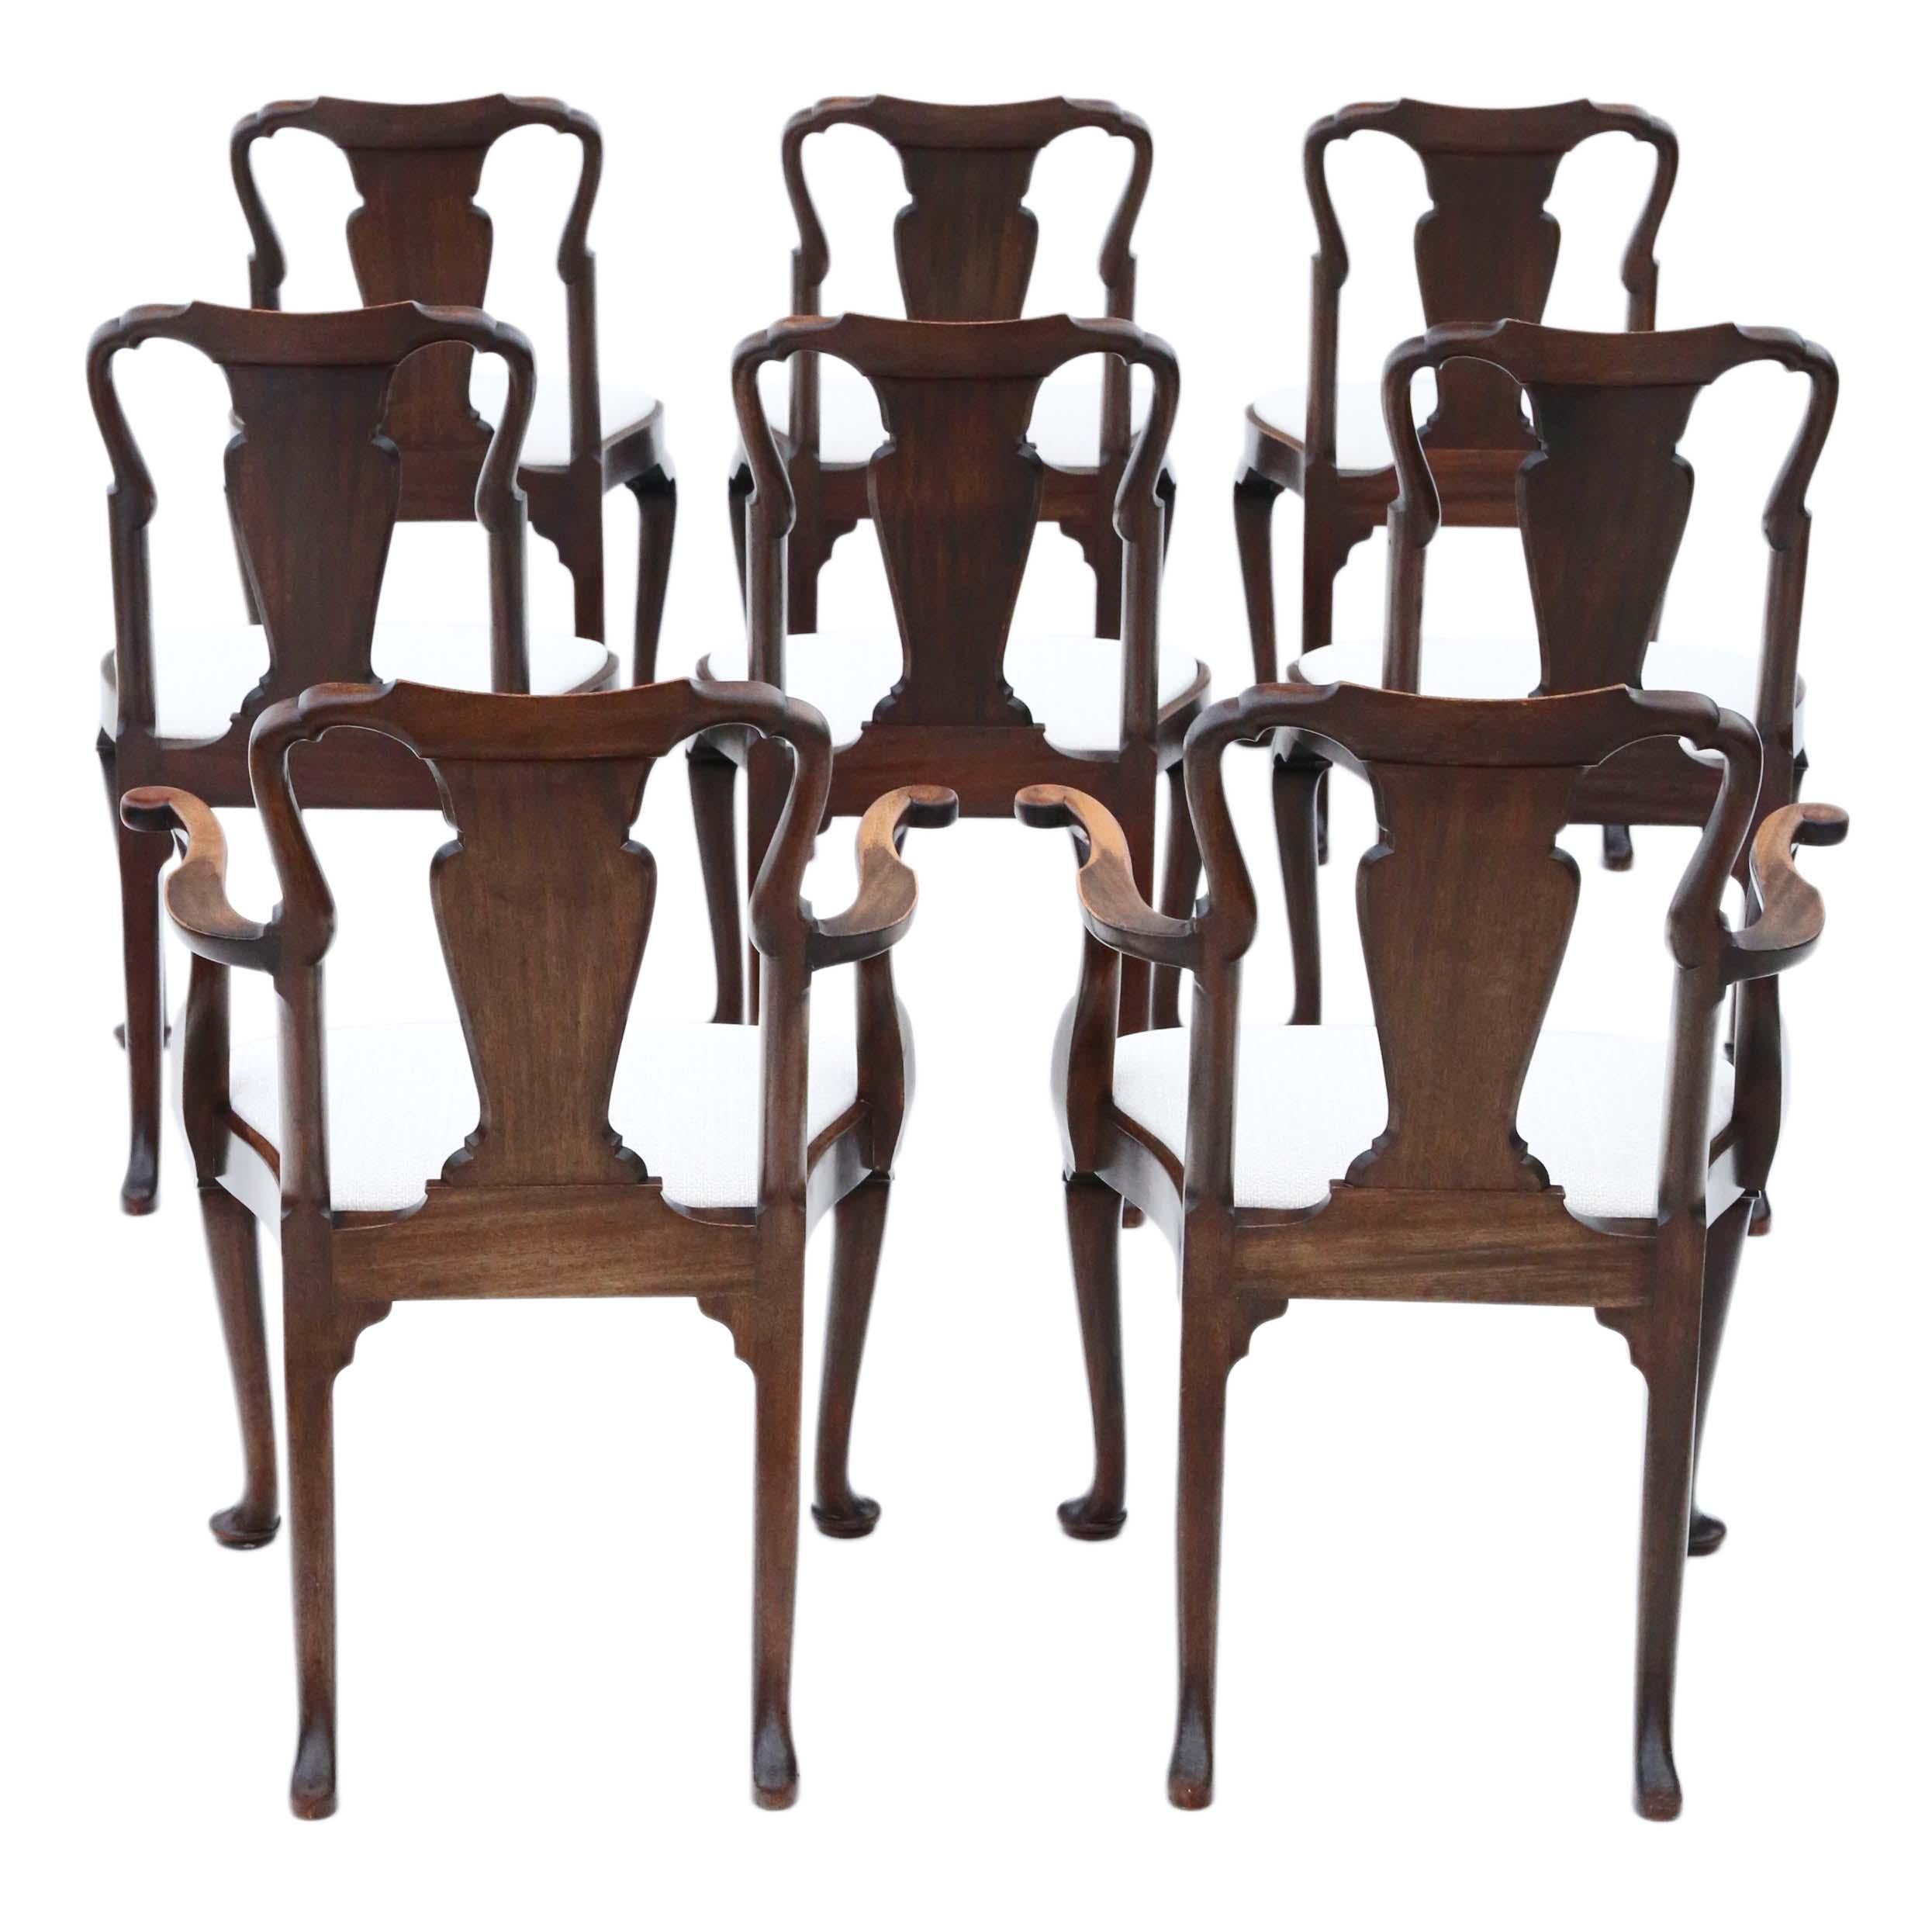 Antique fine quality set of 8 (6+2) mahogany dining chairs Queen Anne revival, circa 1910.

Exceptional quality, solid, heavy and strong with no loose joints. Lovely simple plain but opulent design, with wide generous seats. No woodworm.

Drop